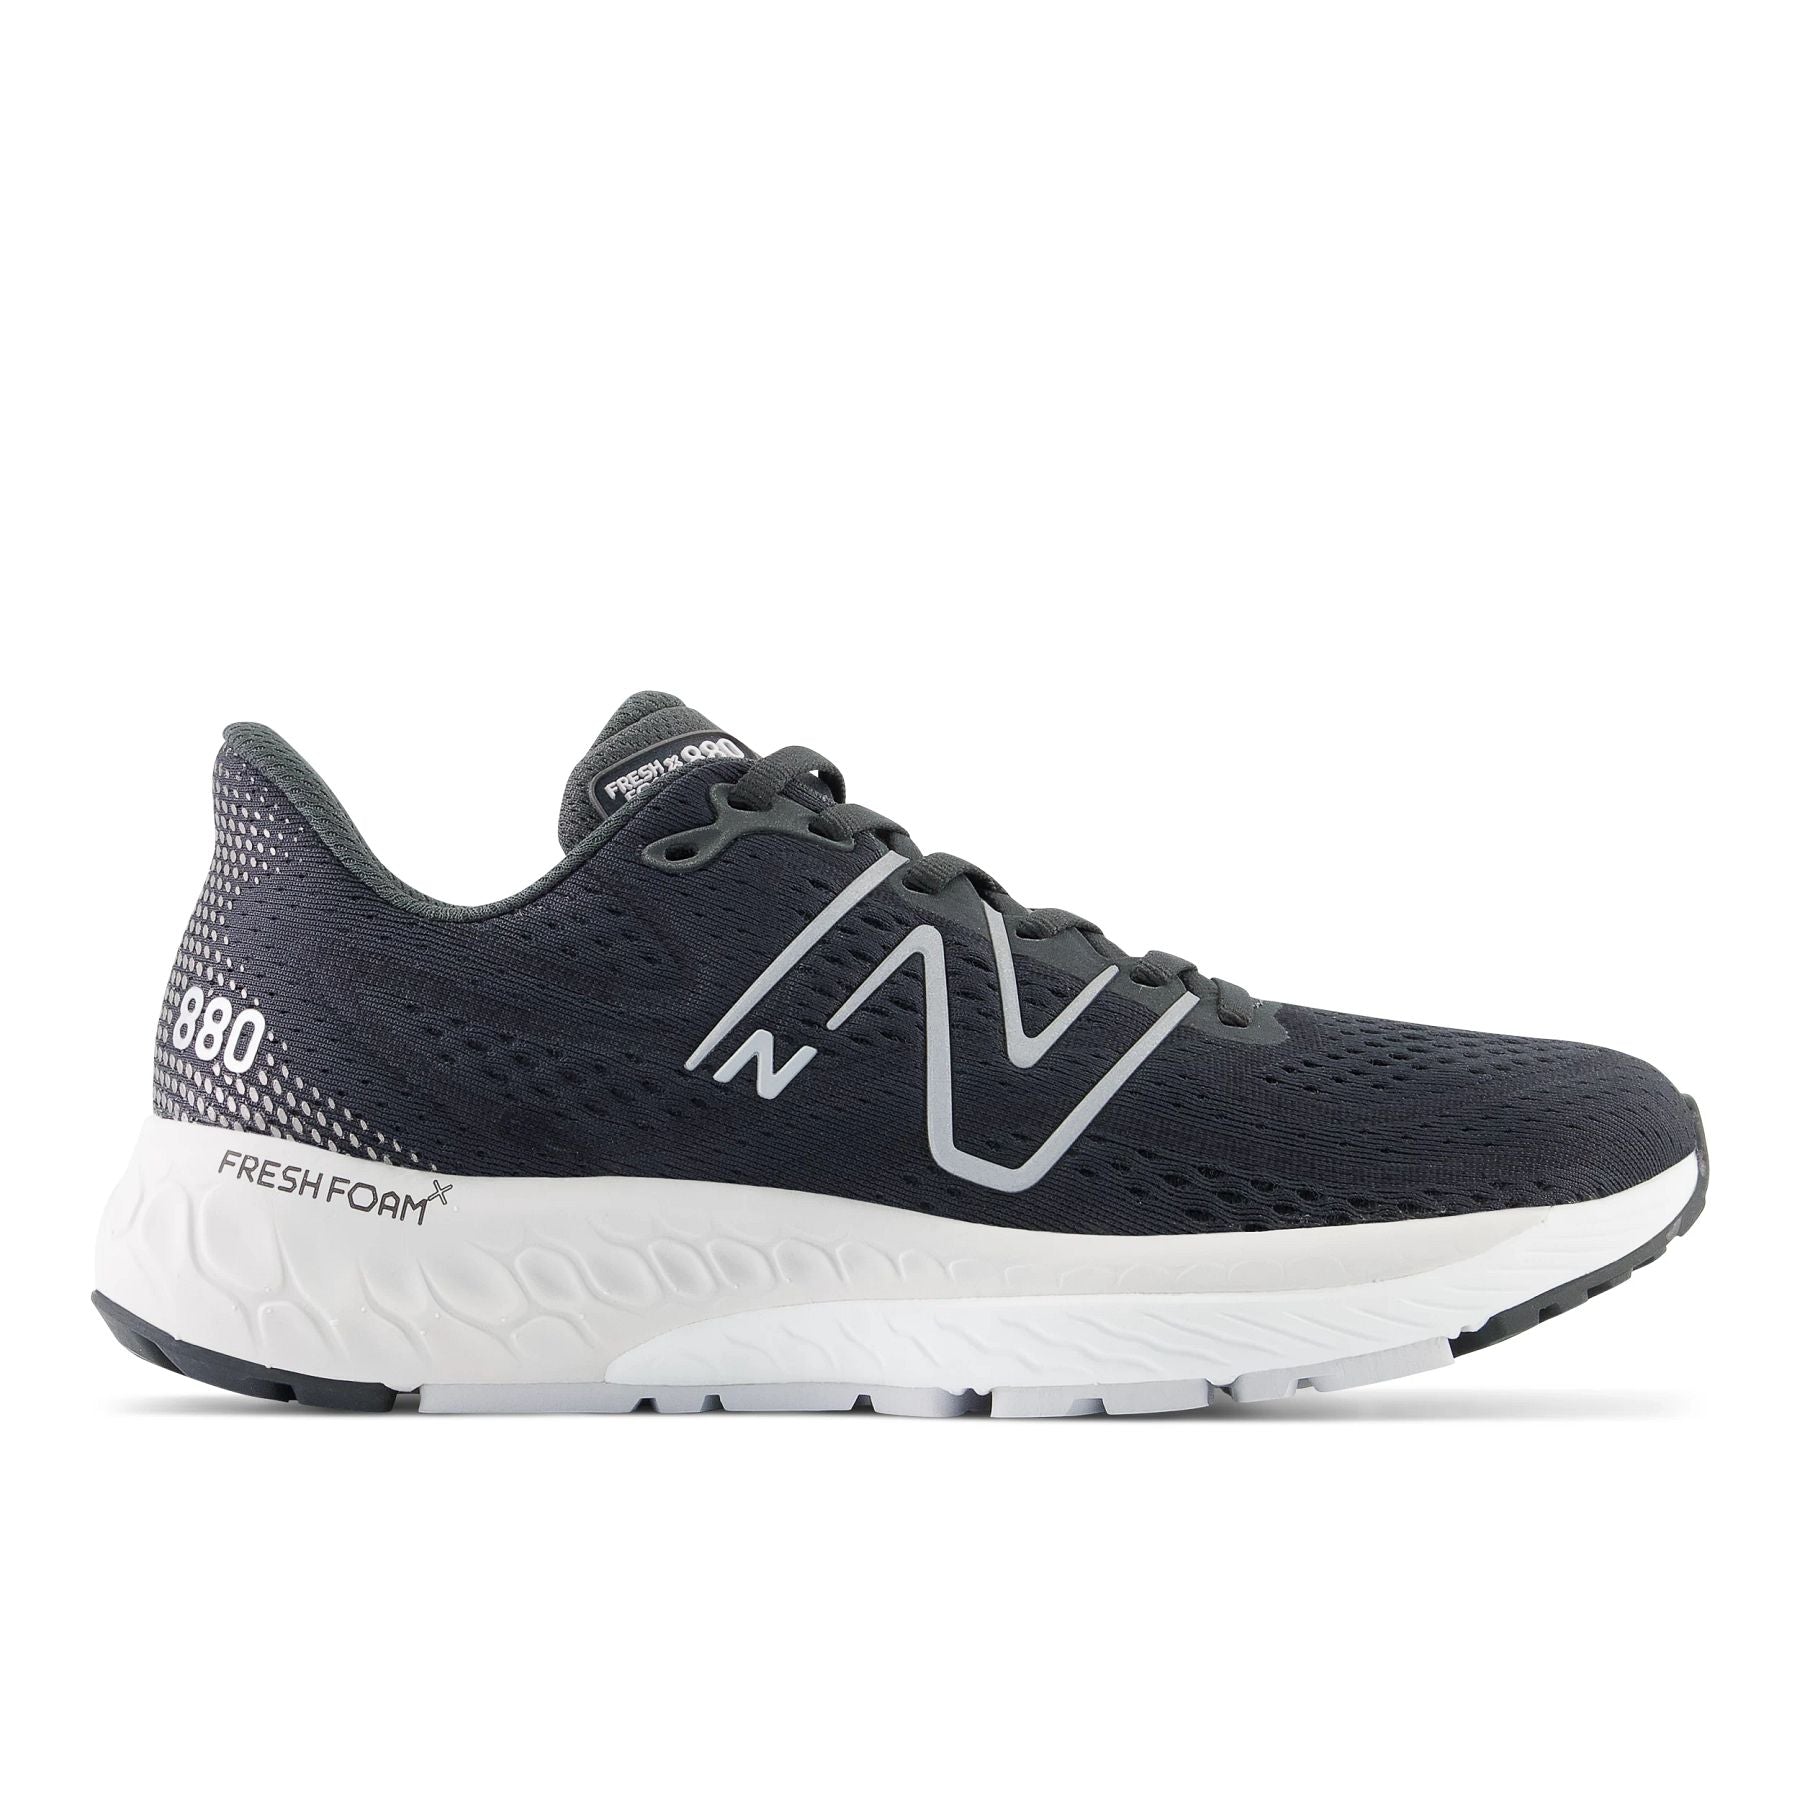 Lateral view of the Women's 880 V13 by New Balance in the color Black / Silver